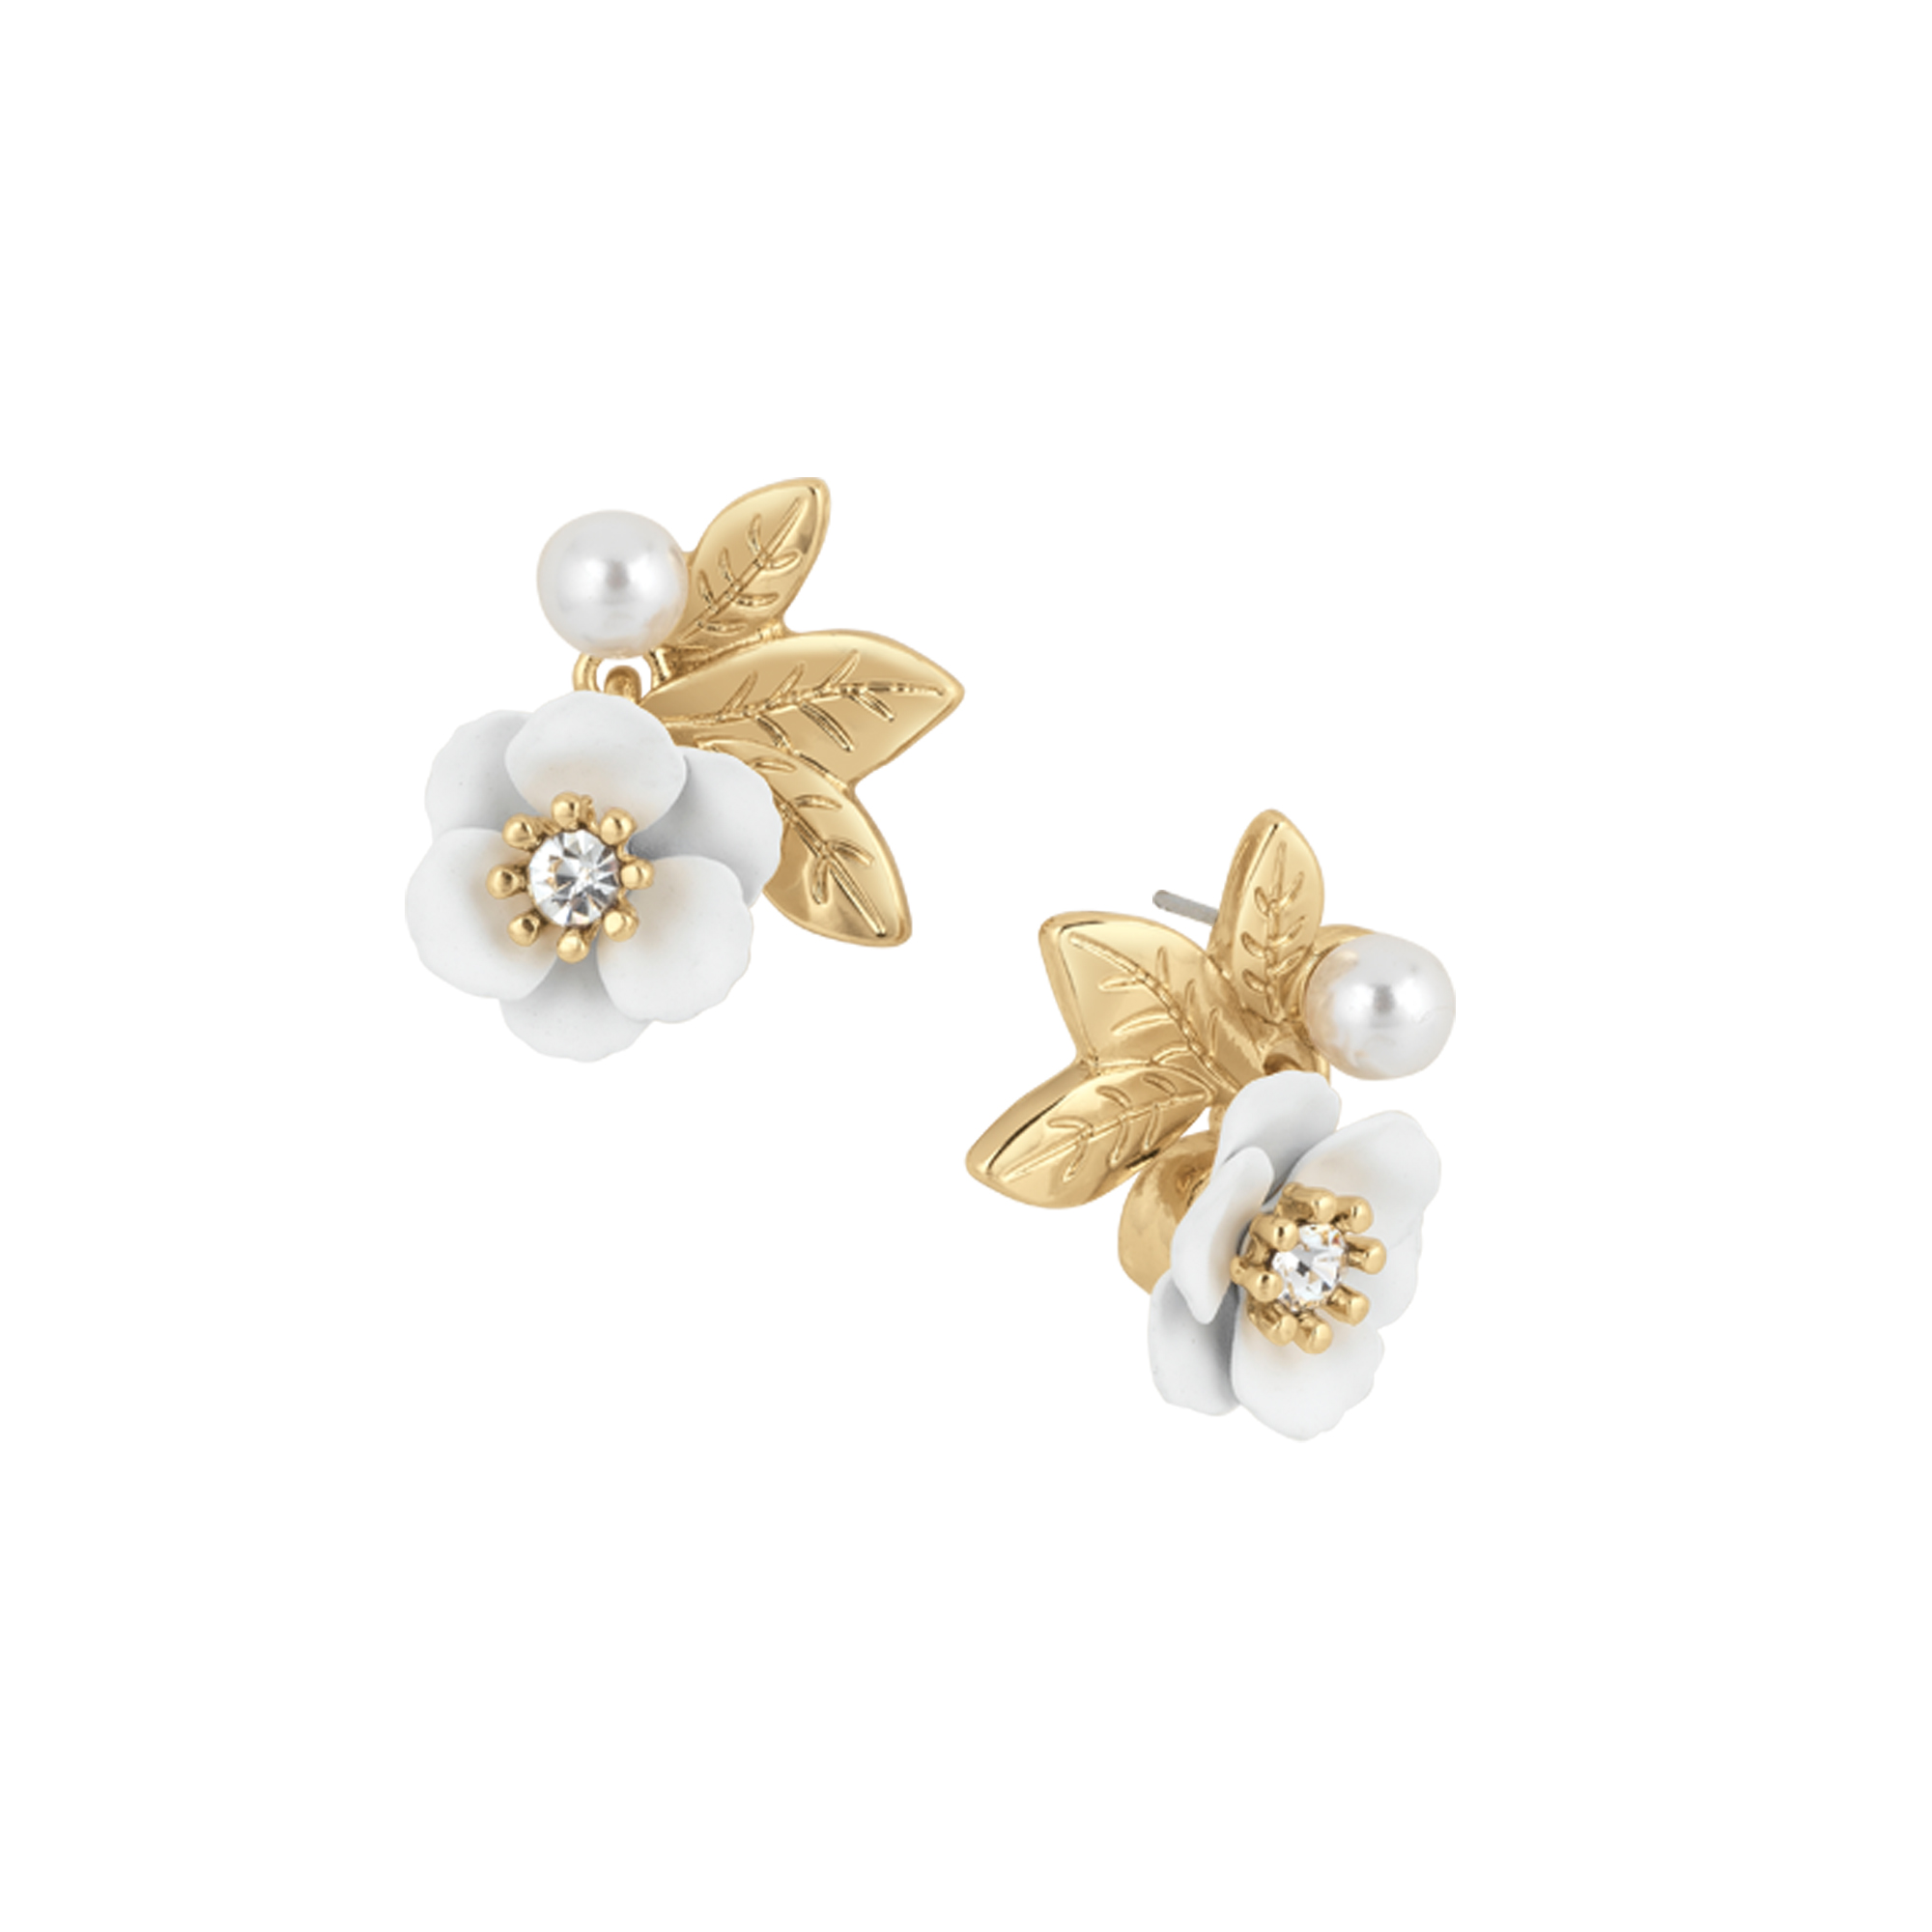 The Floral Majesty Earrings